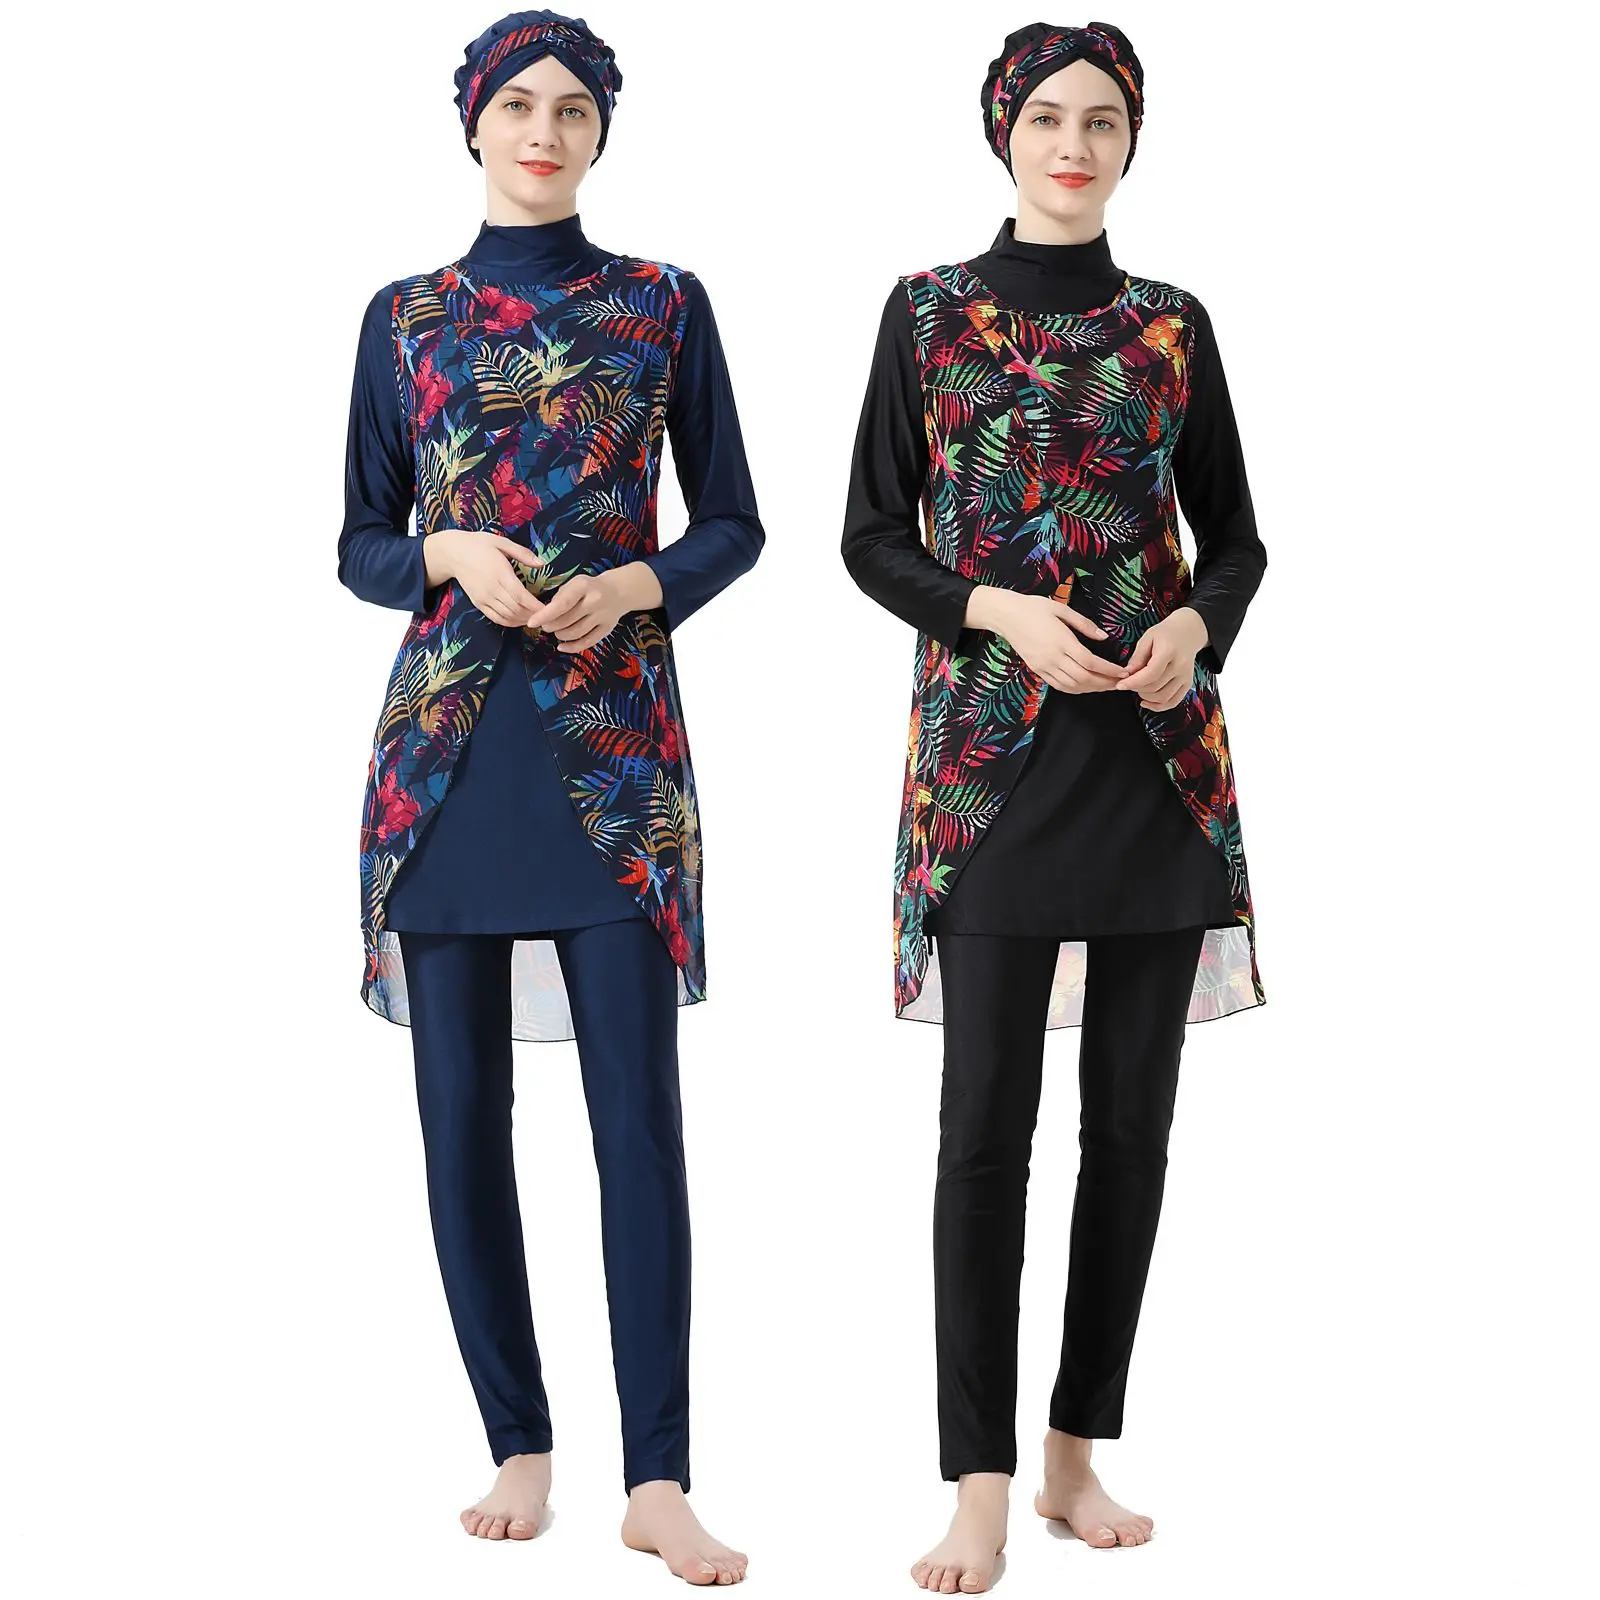 

4PCS/Set Swimwear Floral Muslim Swimming Suit for Women Burkini with Pareo Printing Four-piece Swimsuits Borkini Femme Musulmane